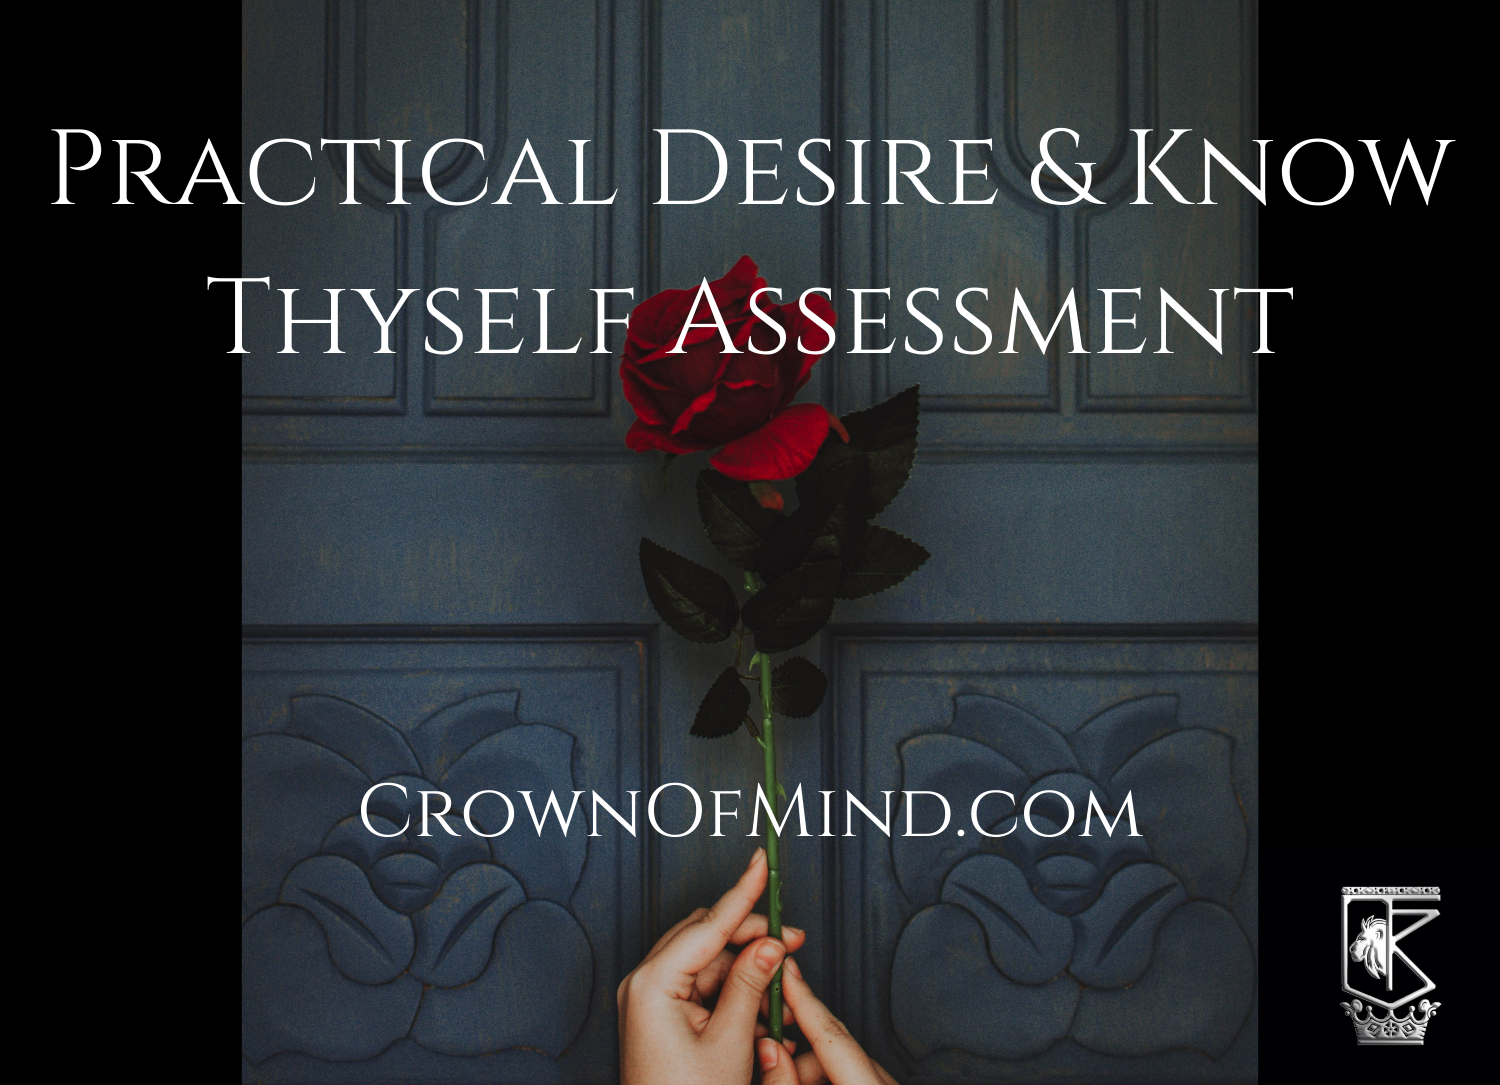 Practical Desire & Know Thyself Assessments